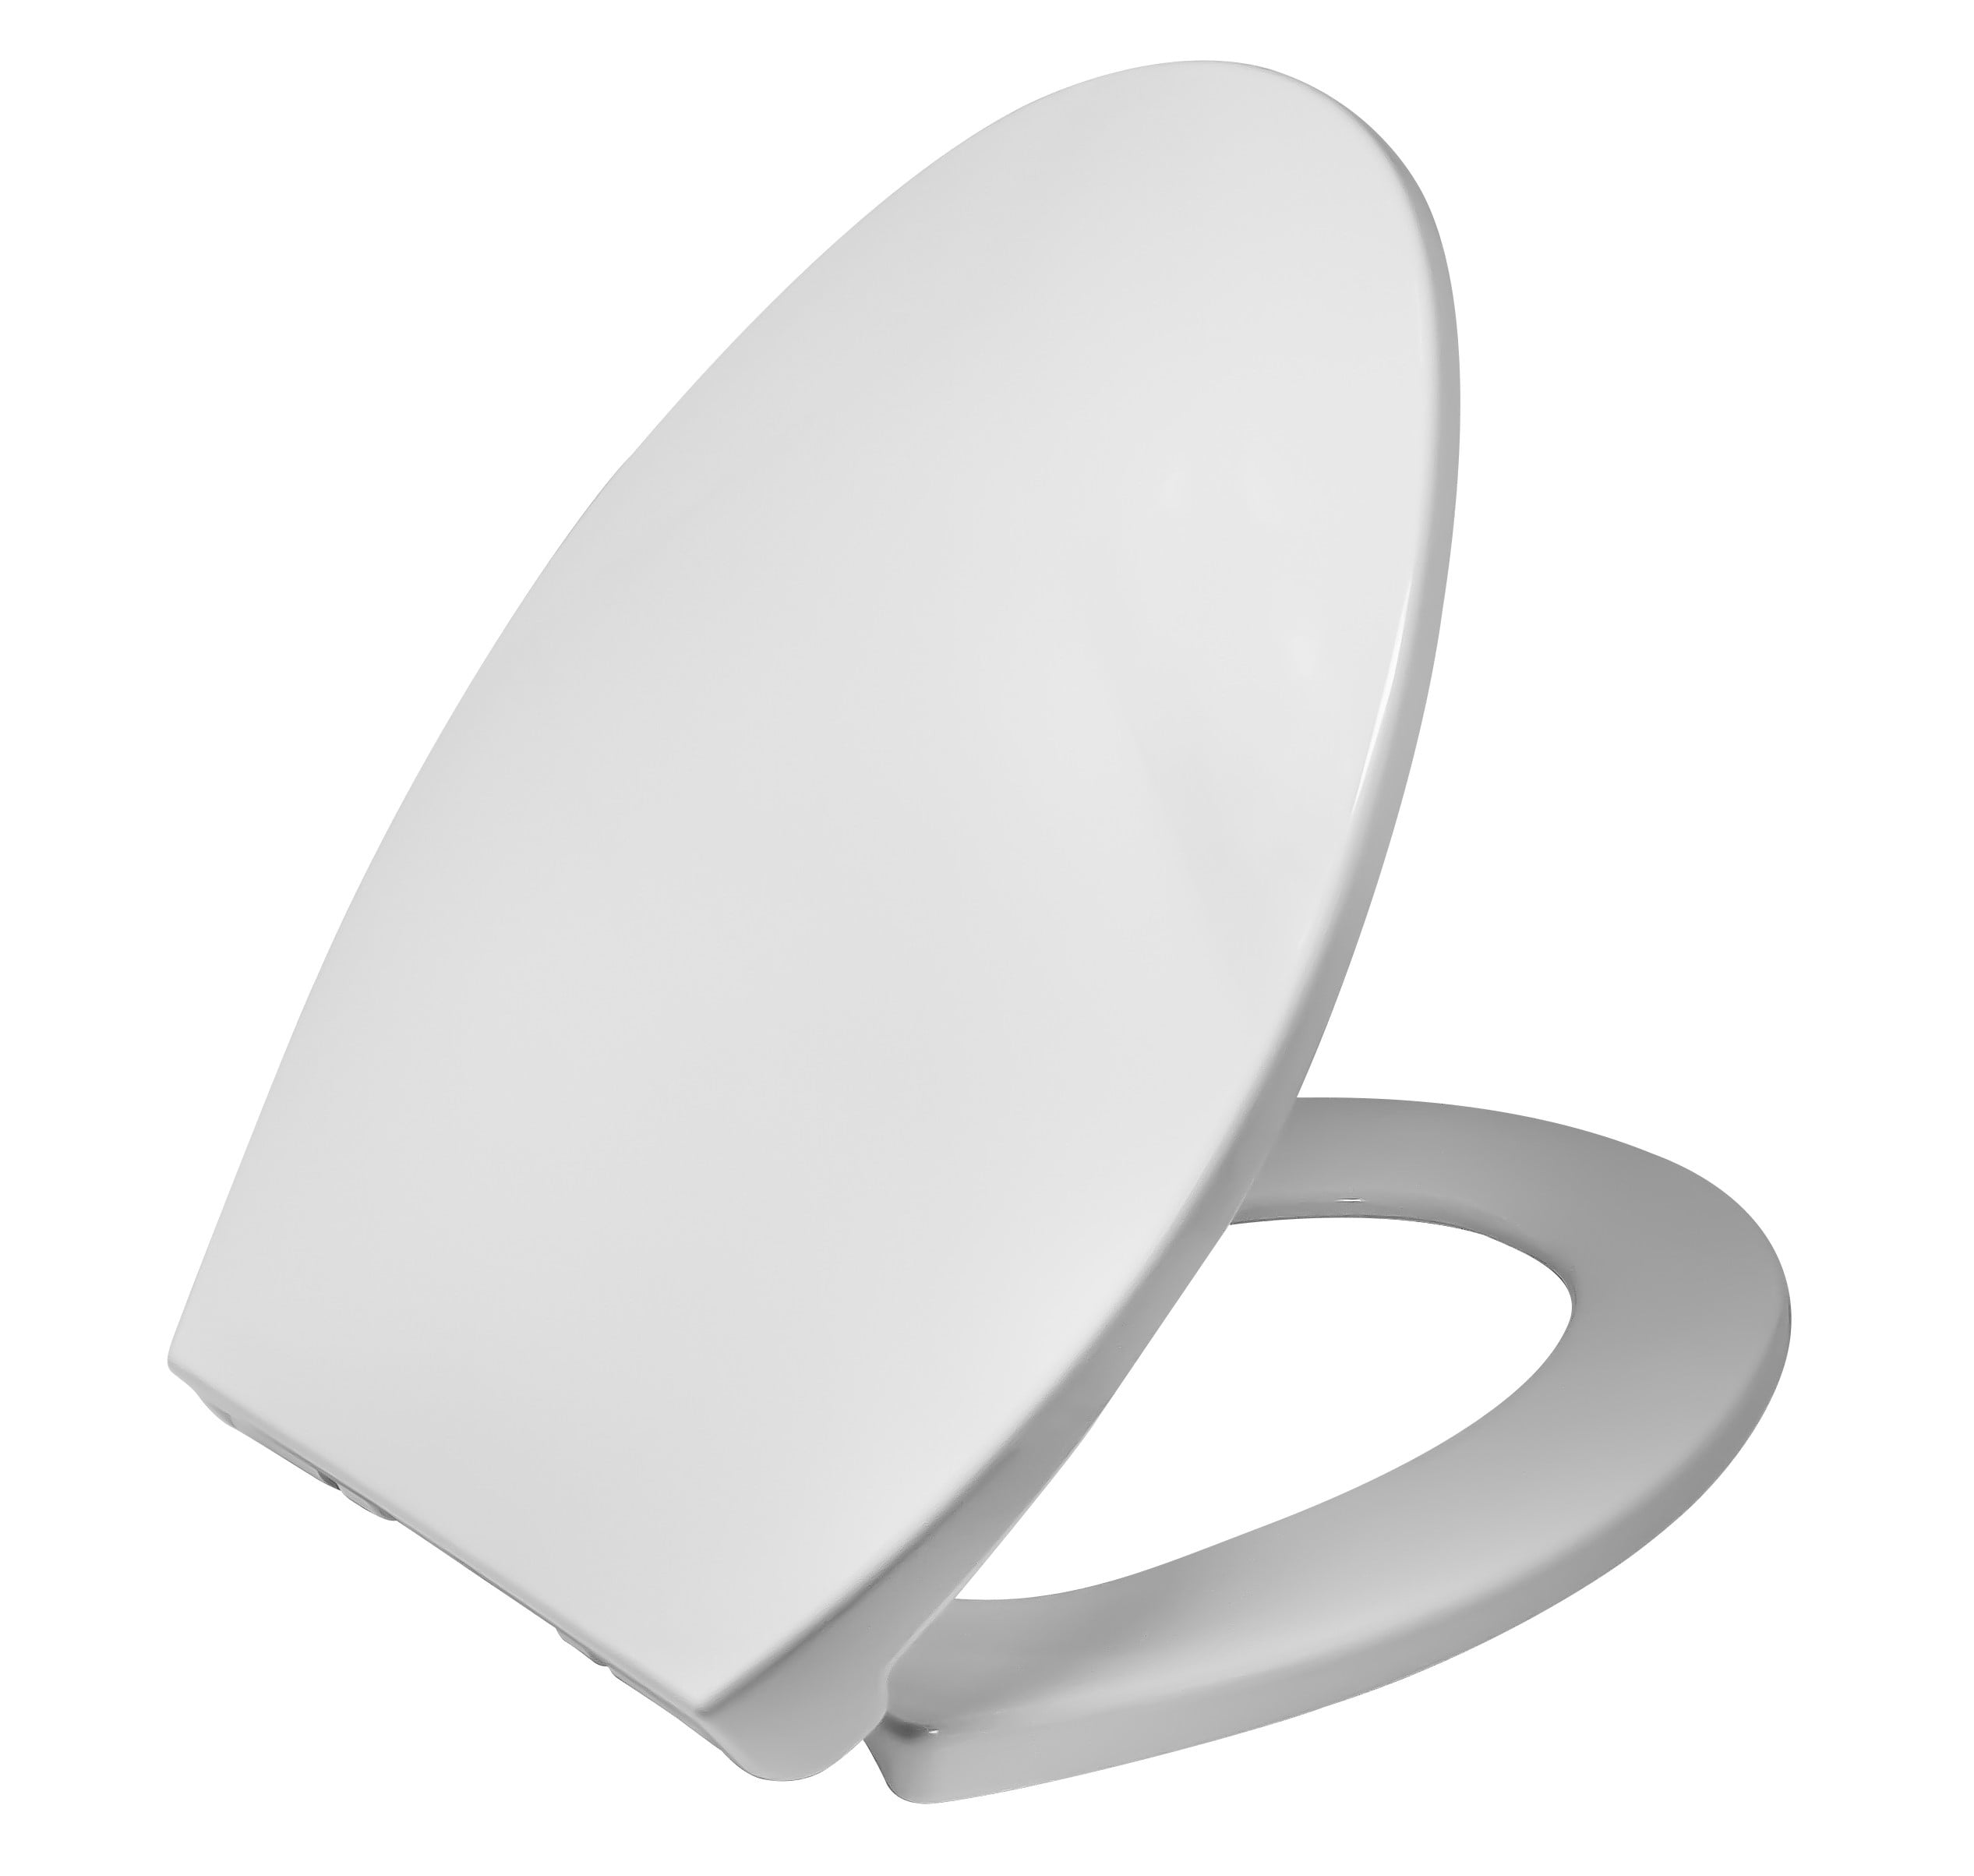 Square Toilet Seat Heavy Duty White Slow Soft Close Seats With Fitting Hinges 